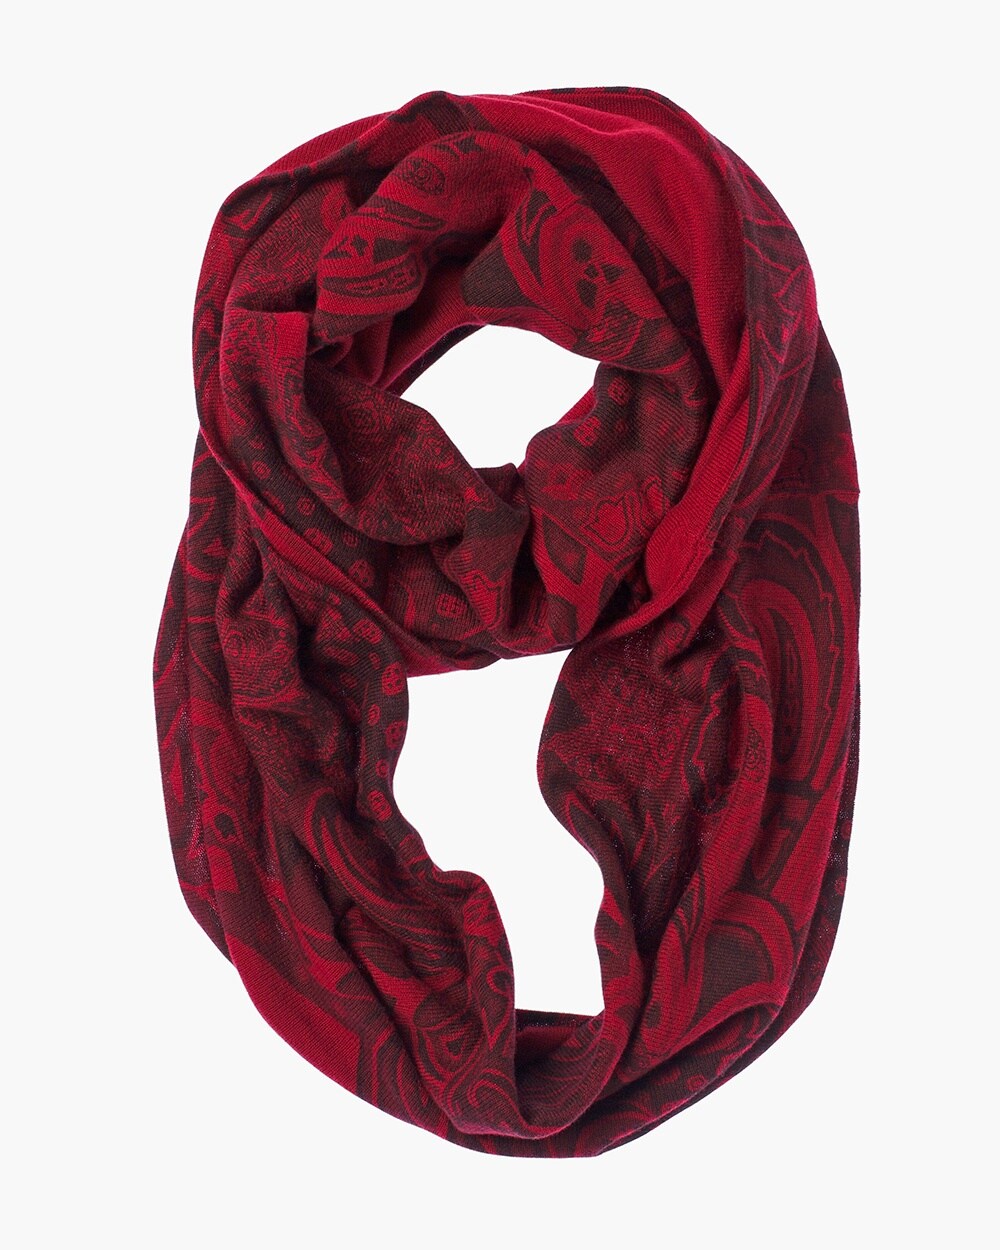 Reversible Red-Printed Infinity Scarf